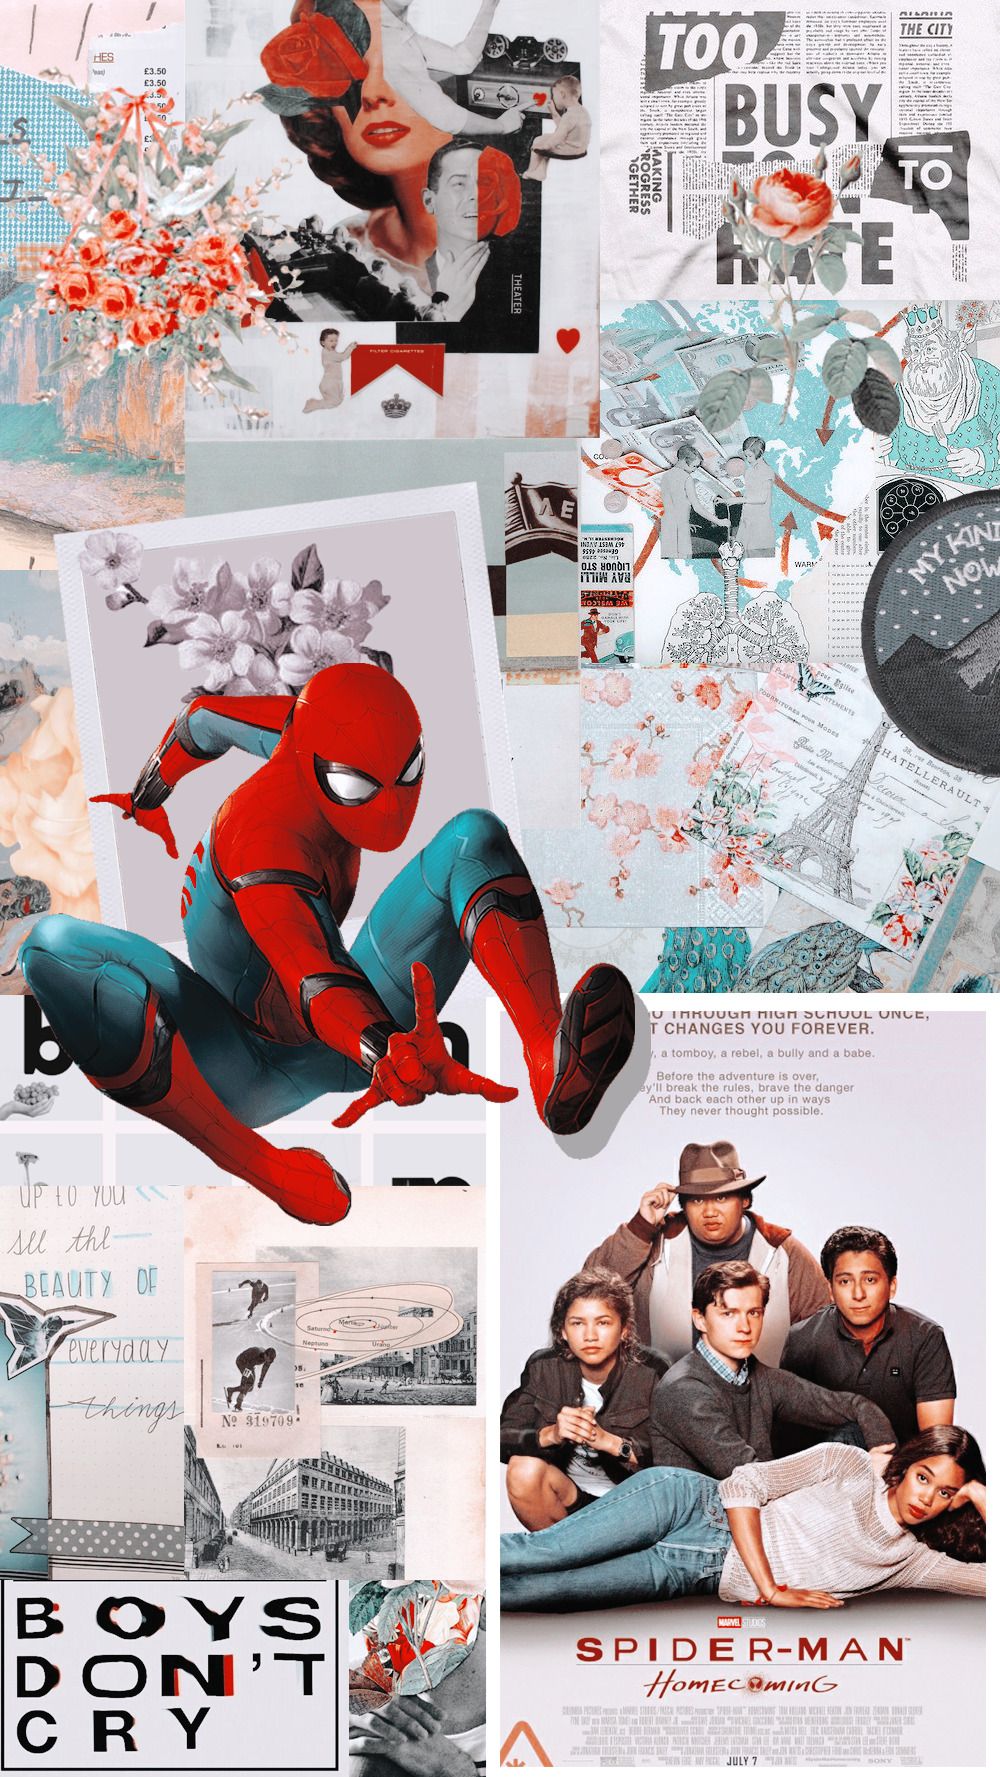 Collage of Spiderman images with a teal and red theme - 